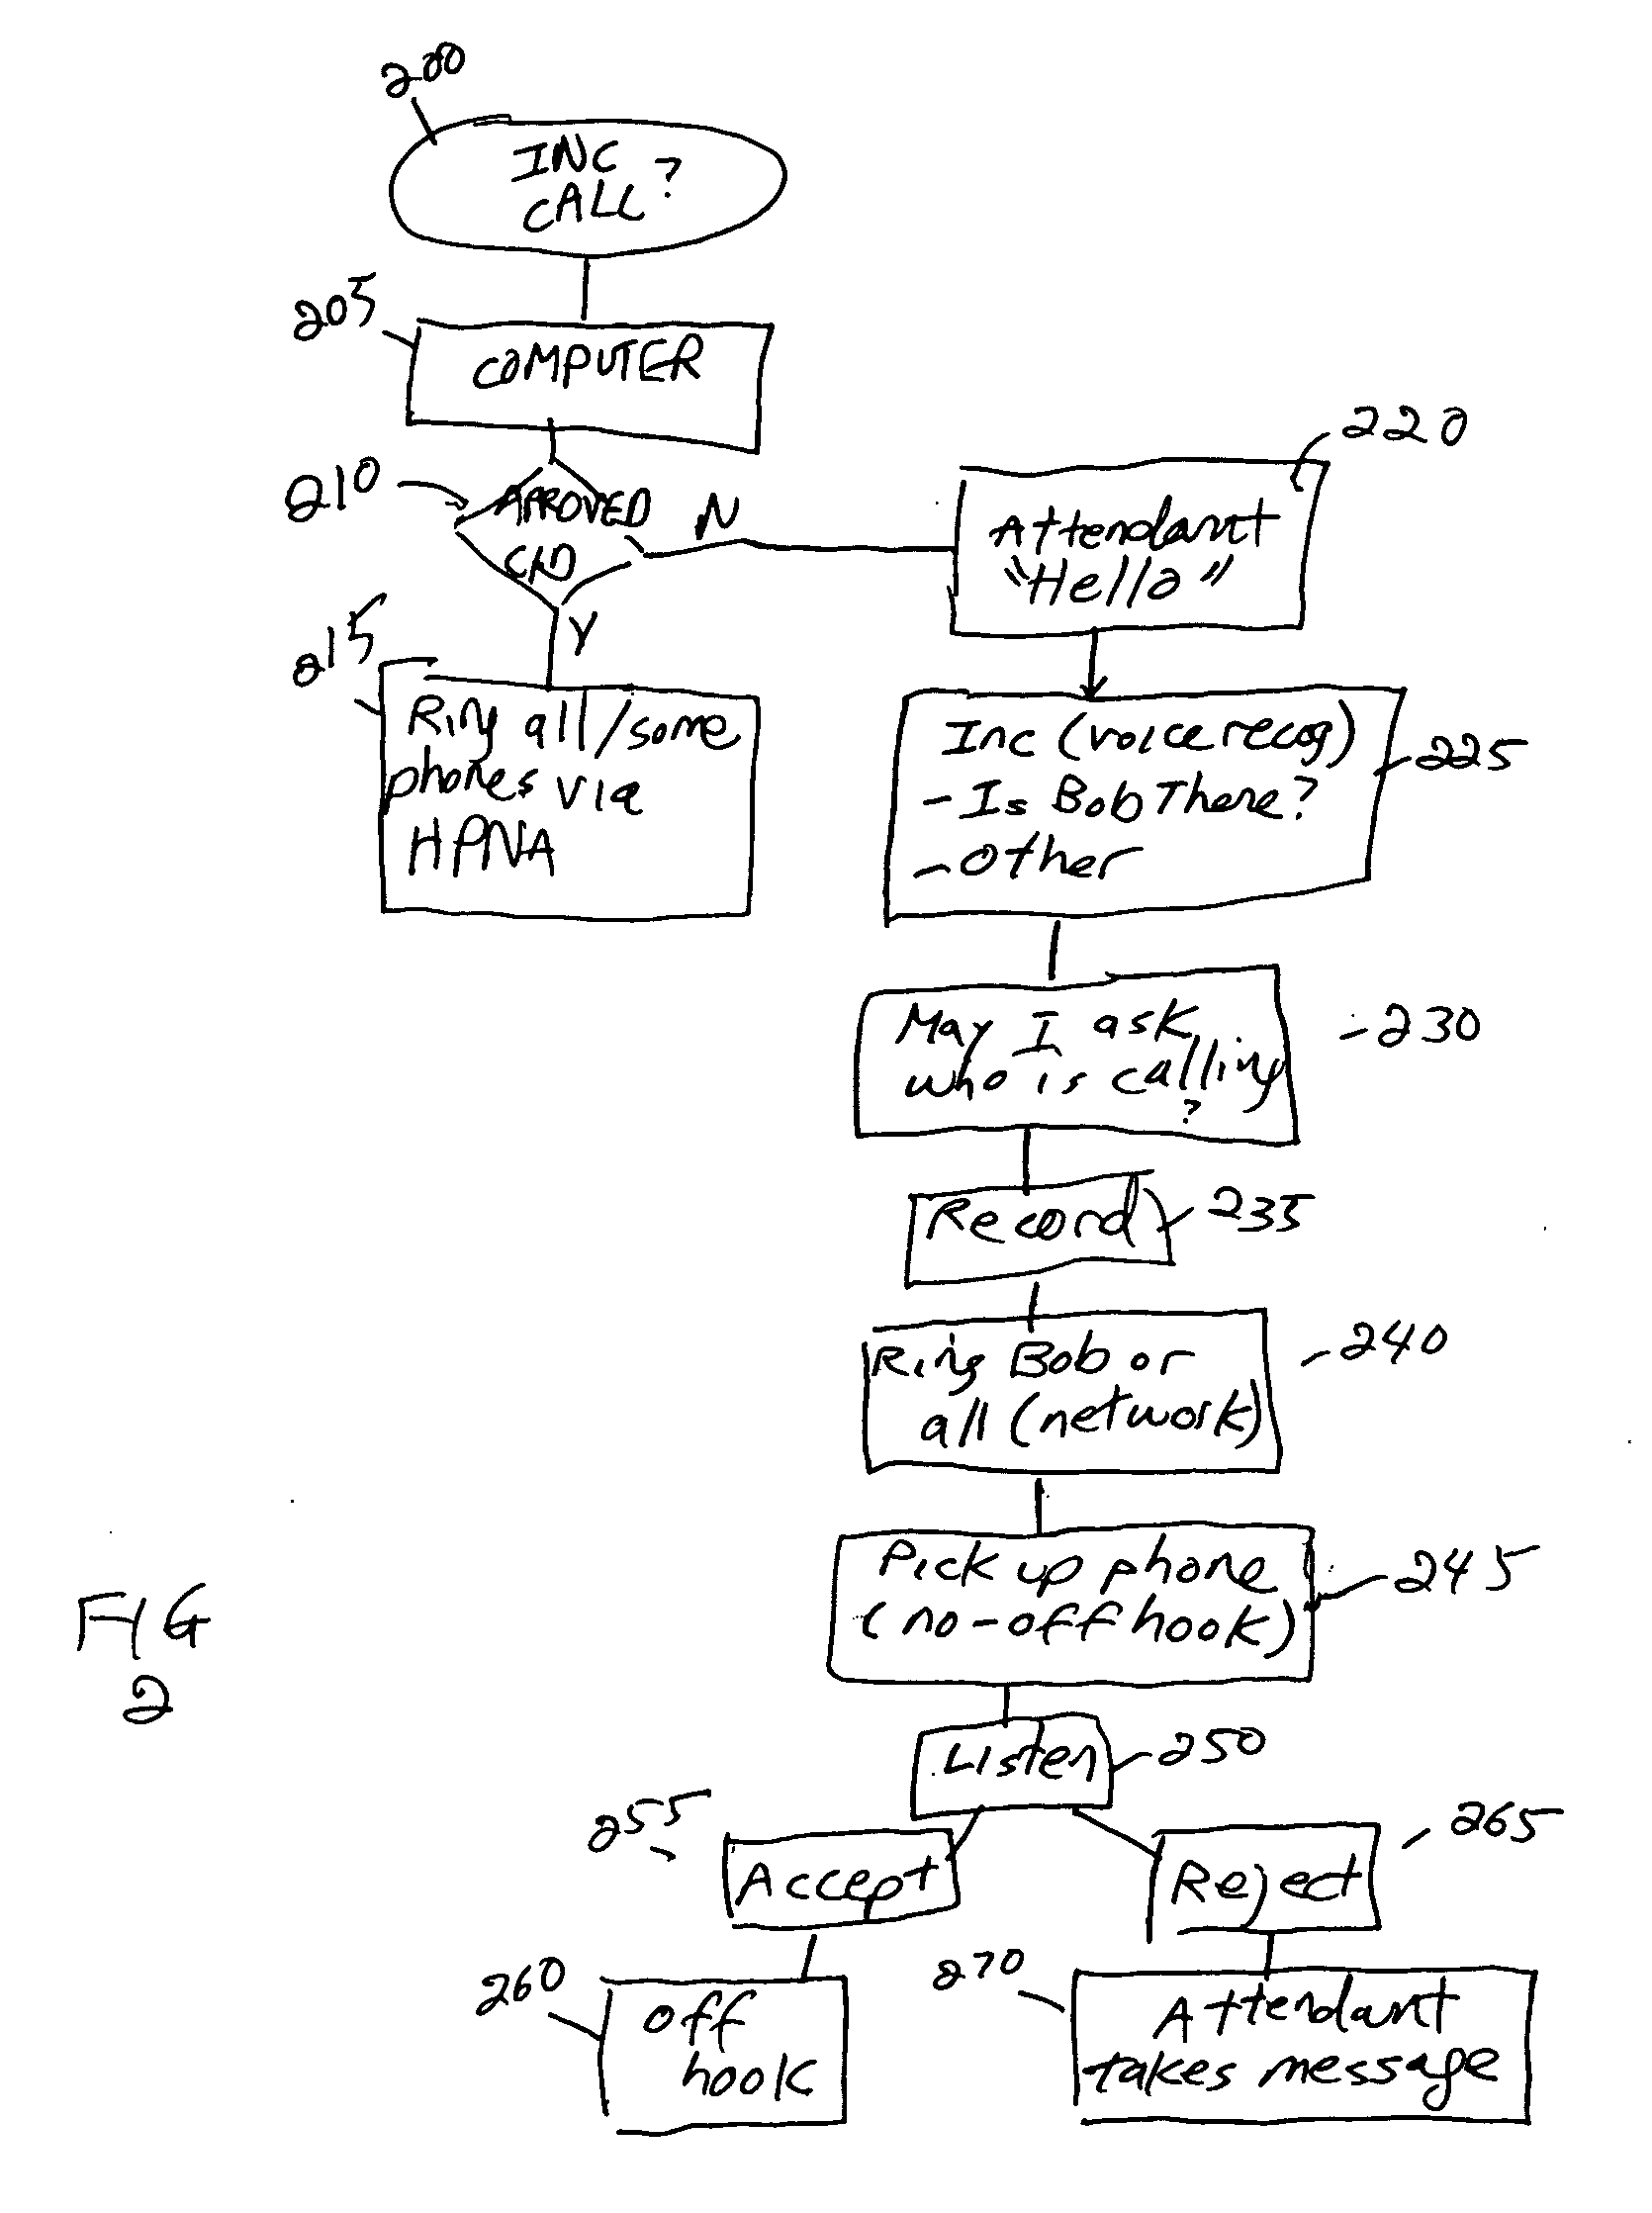 A telephone using a connection network for processing data remotely from the telephone